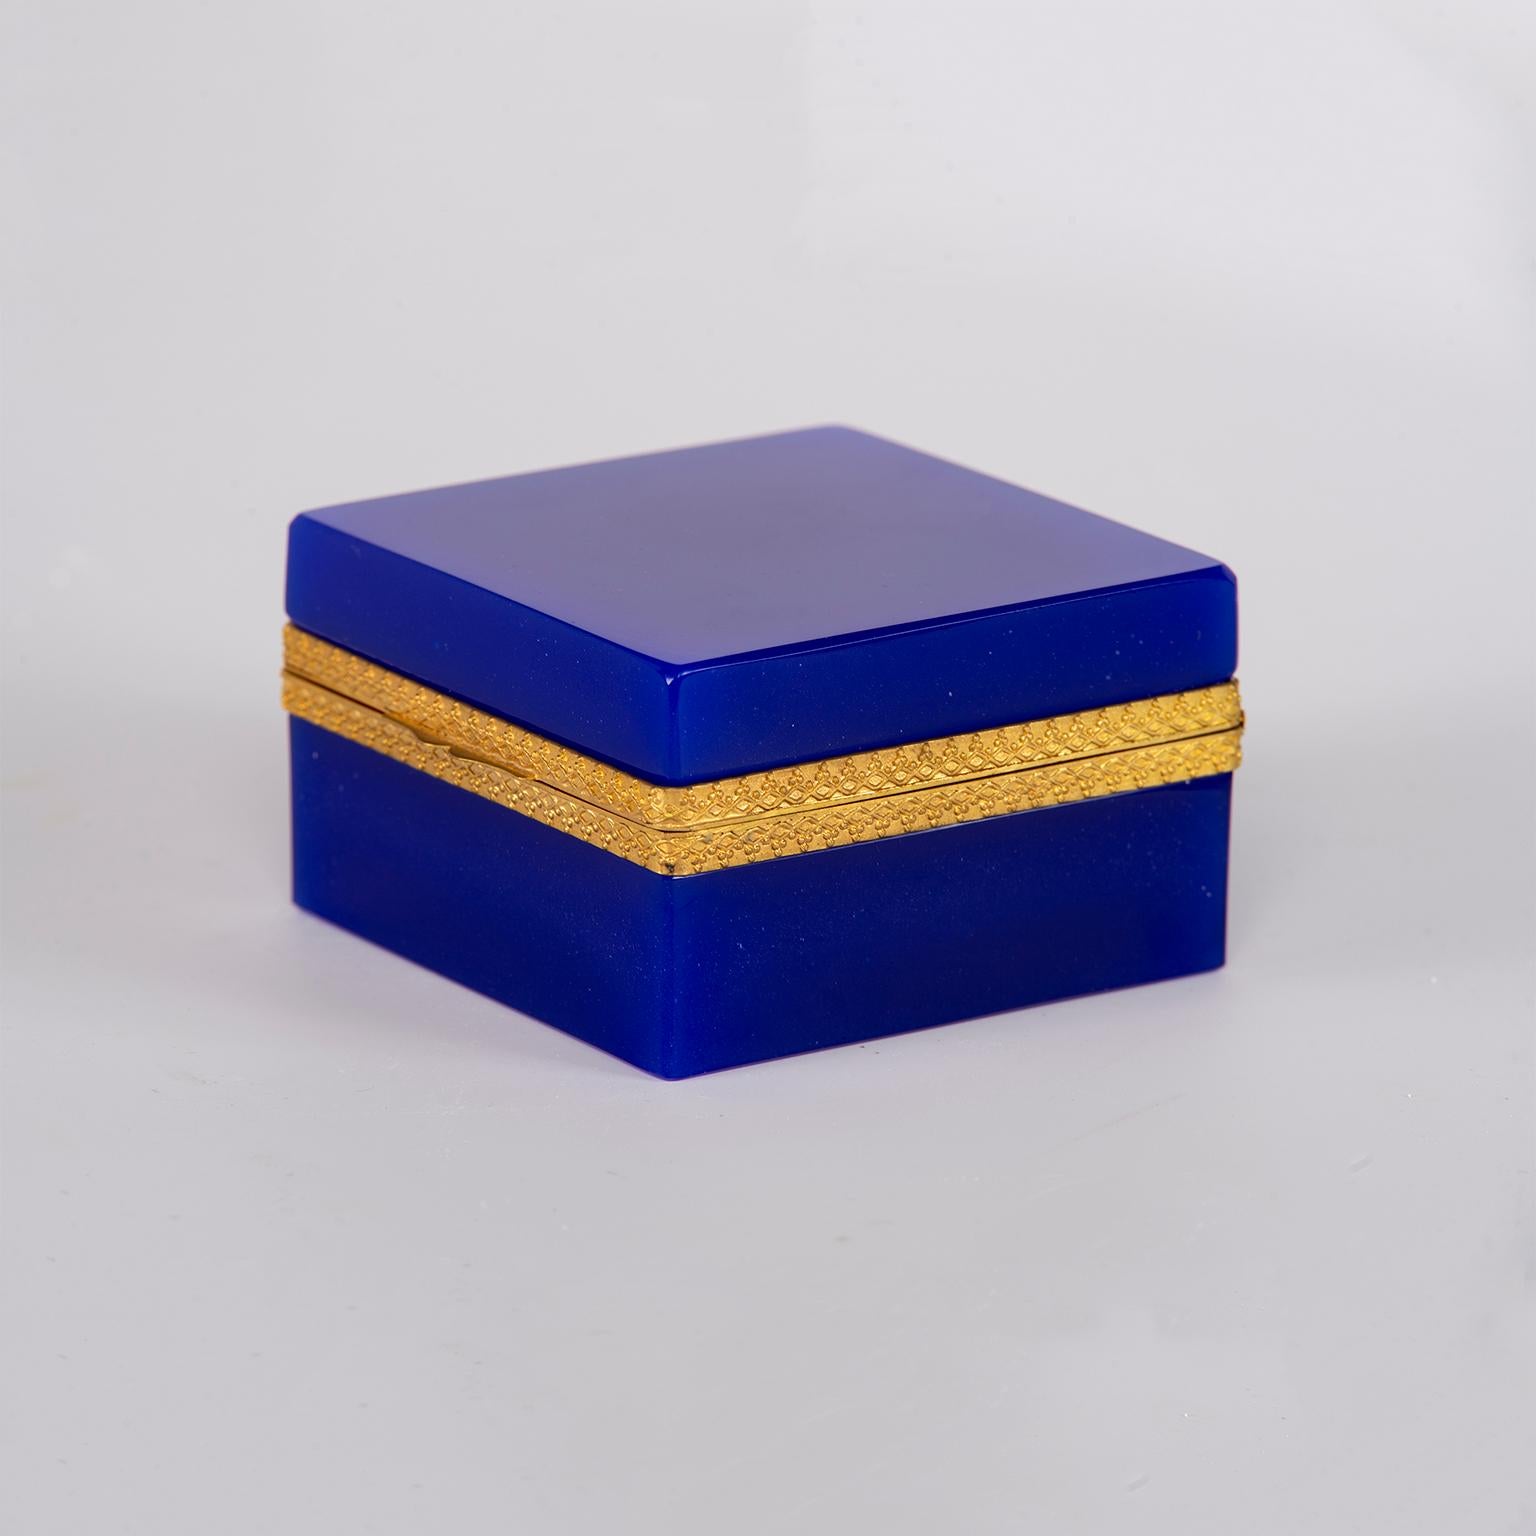 Square French opaline glass box with hinged lid in striking royal blue with polished brass mounts, circa 1920s. Unknown maker.